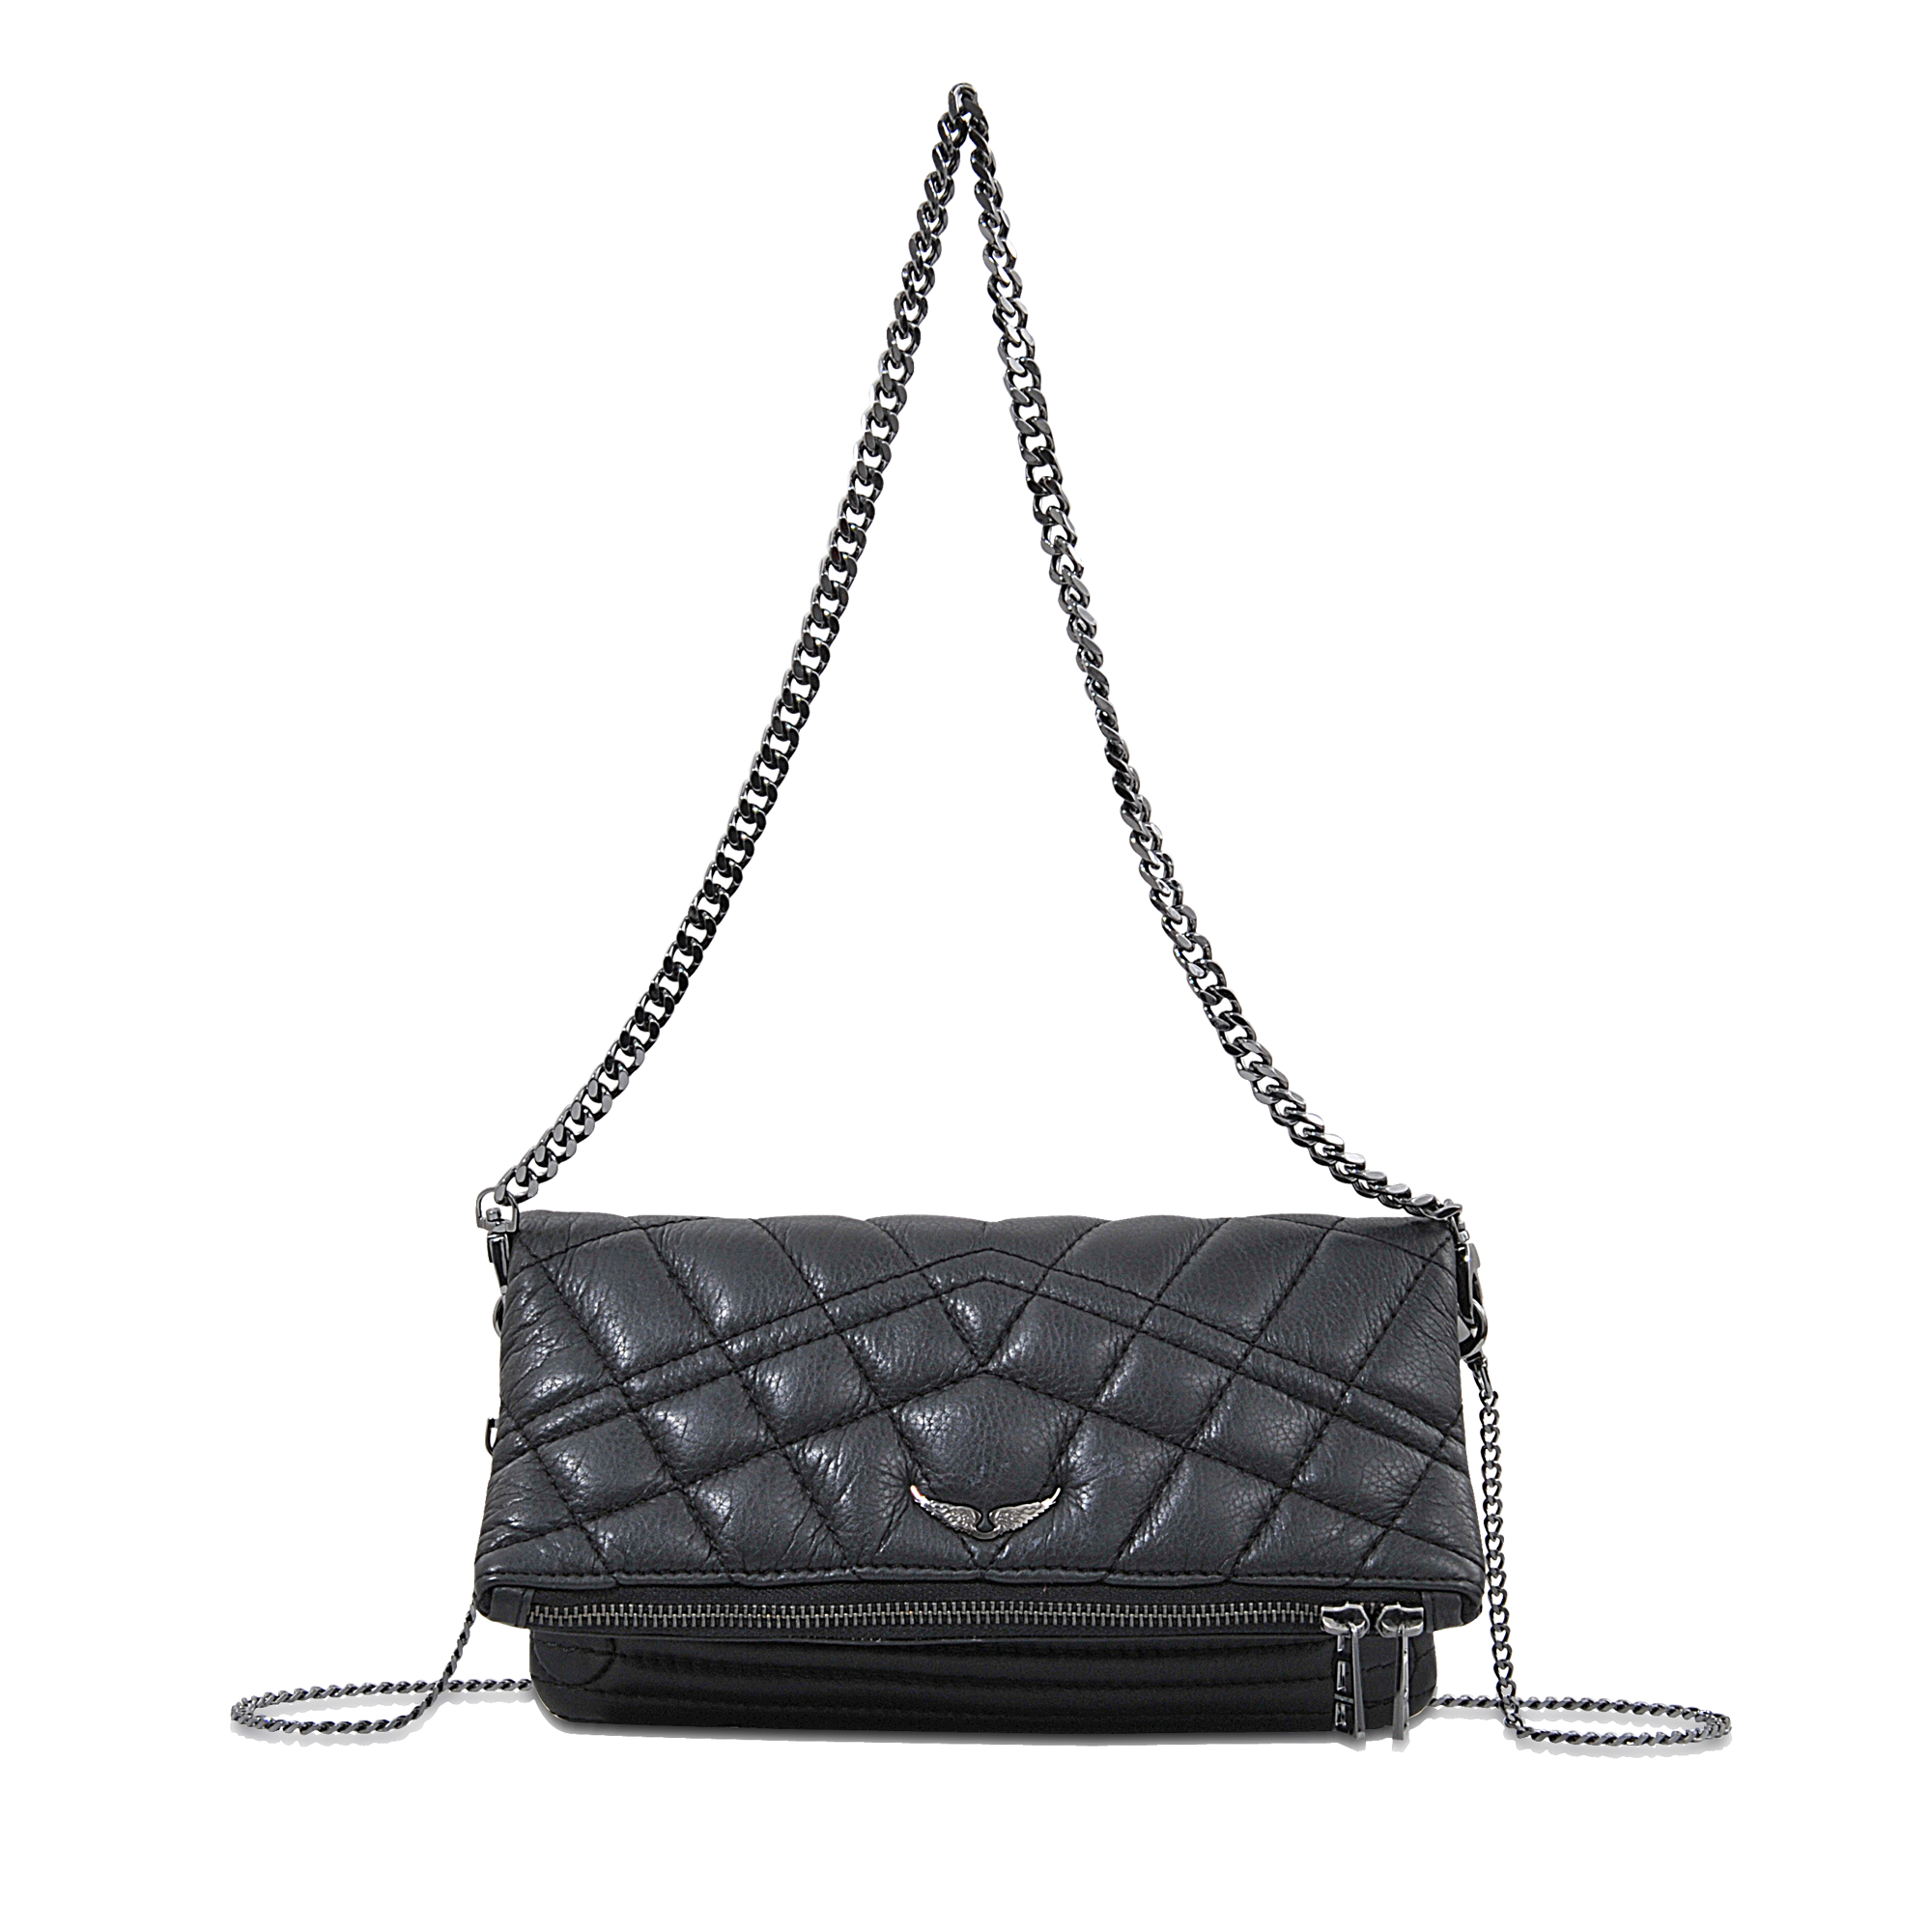 Zadig & Voltaire Rock Quilted Clutch in Black - Lyst